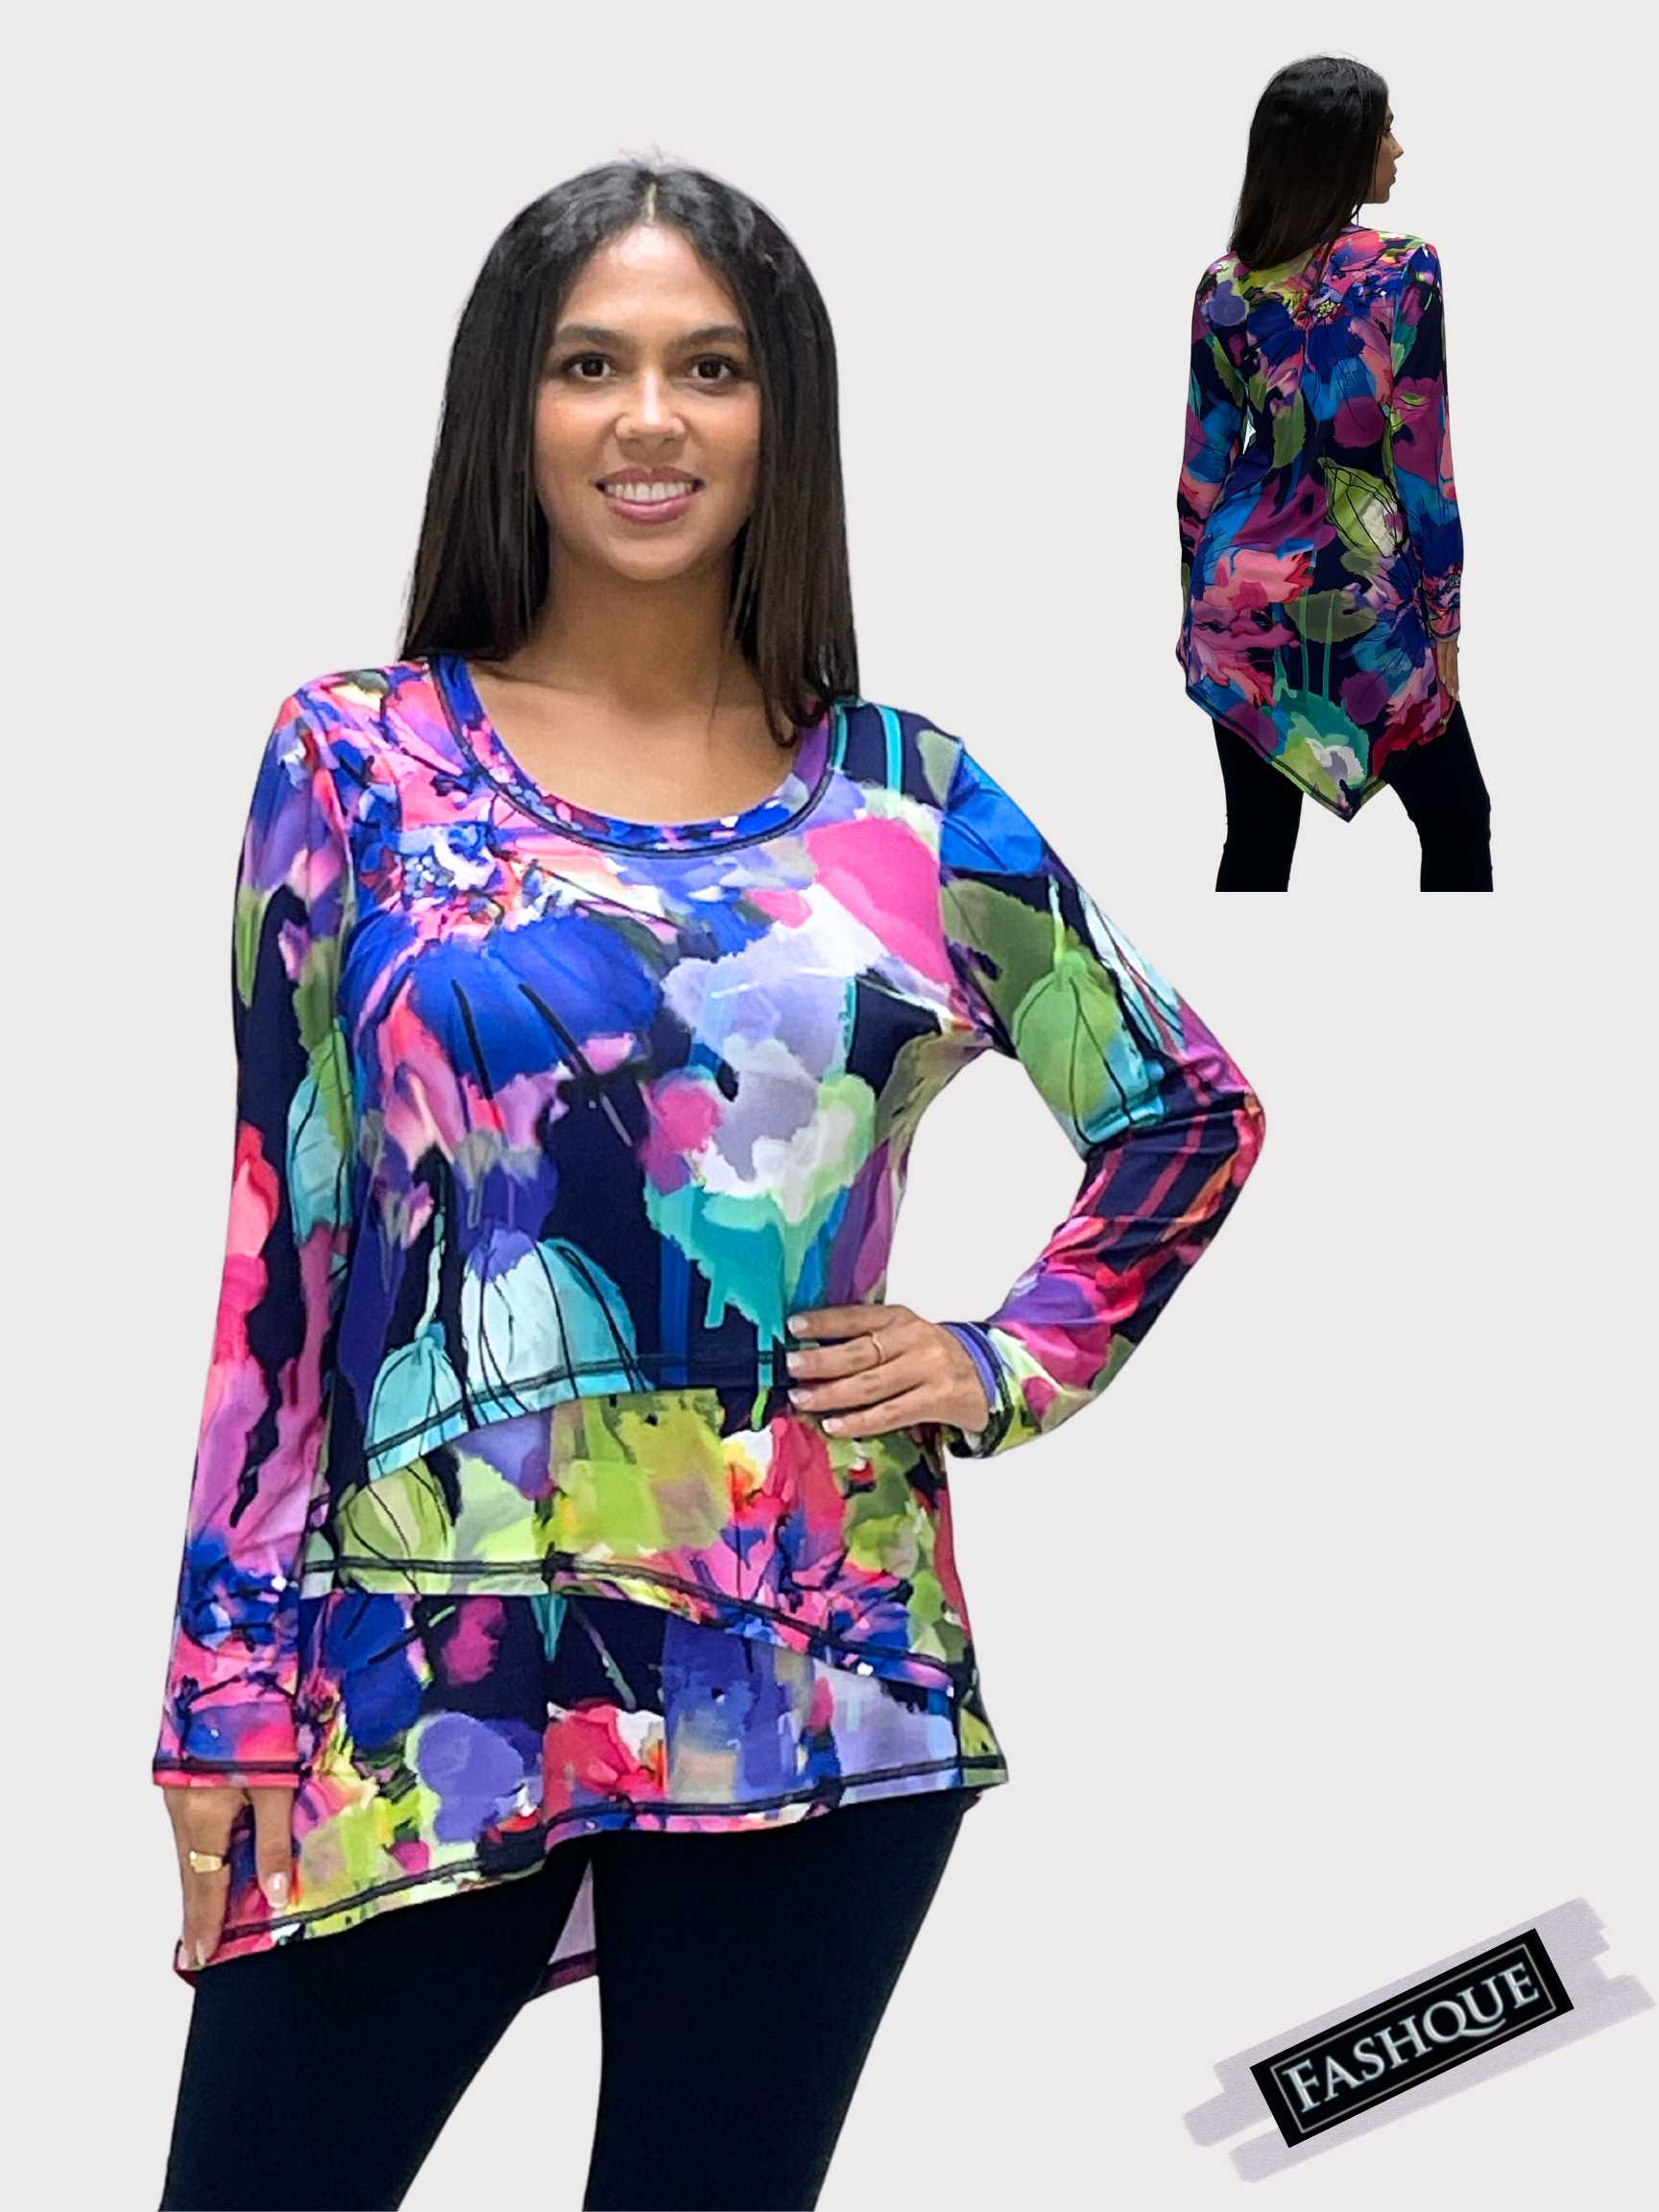 FASHQUE - Layered Scoop Neck Sharkbite Tunic Top - T2446